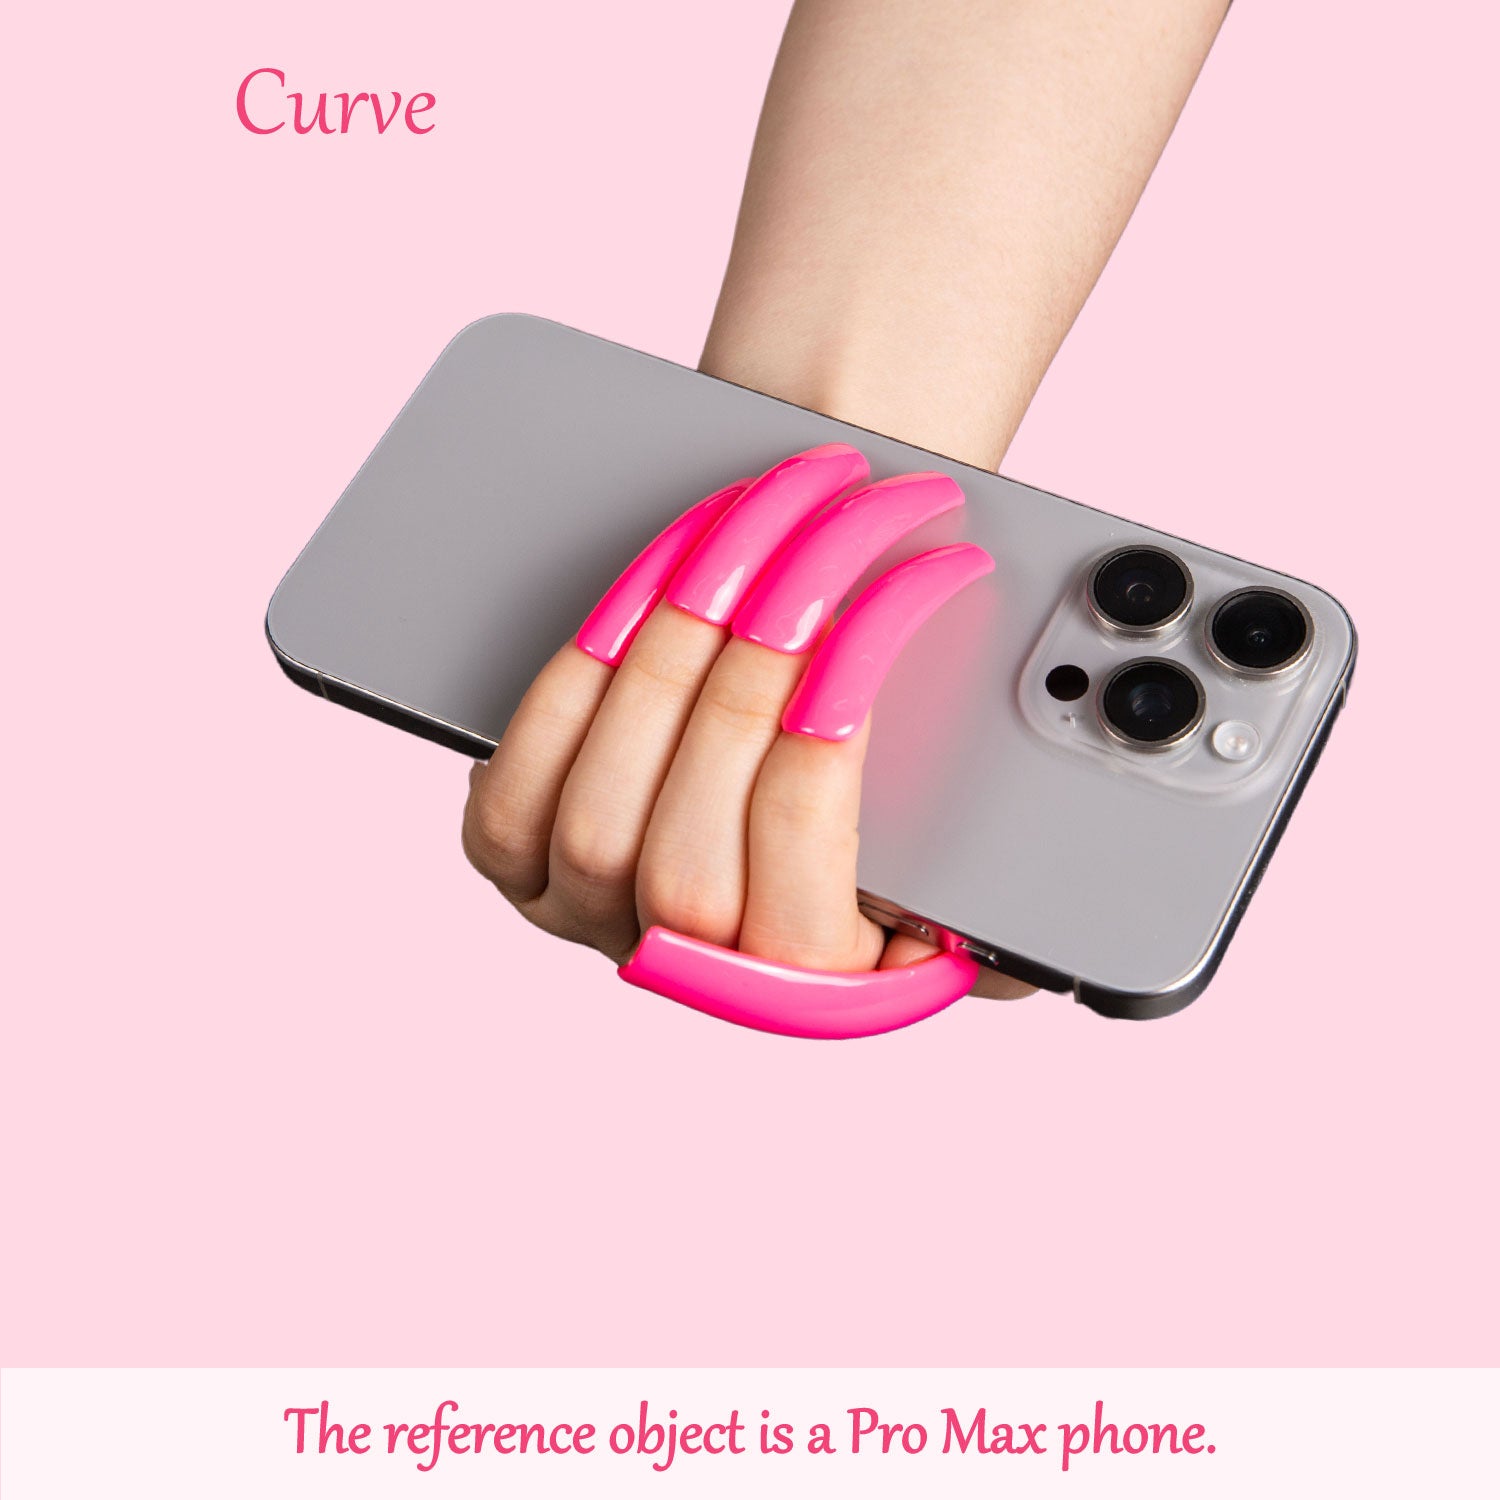 Hand with bright pink curved press-on nails holding a Pro Max phone. Reference object Pro Max phone.